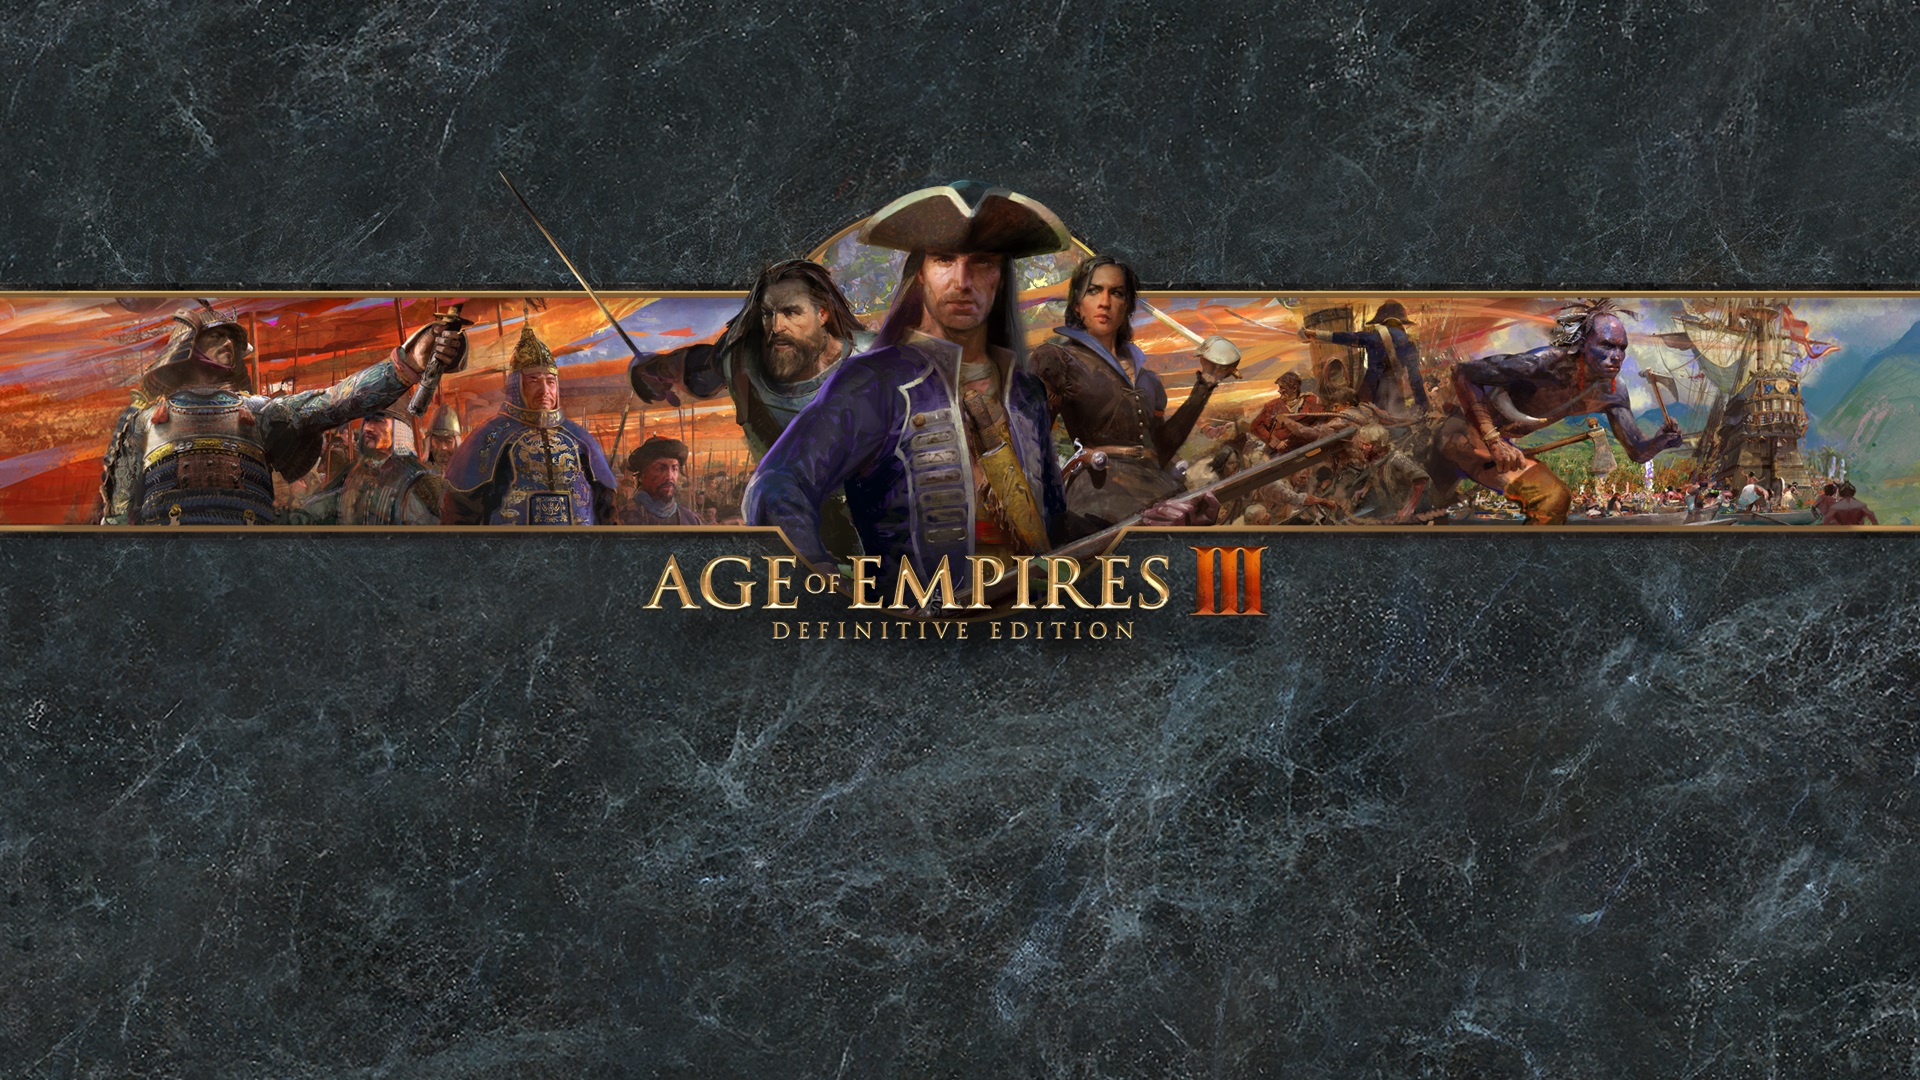 Age of empires for steam фото 72